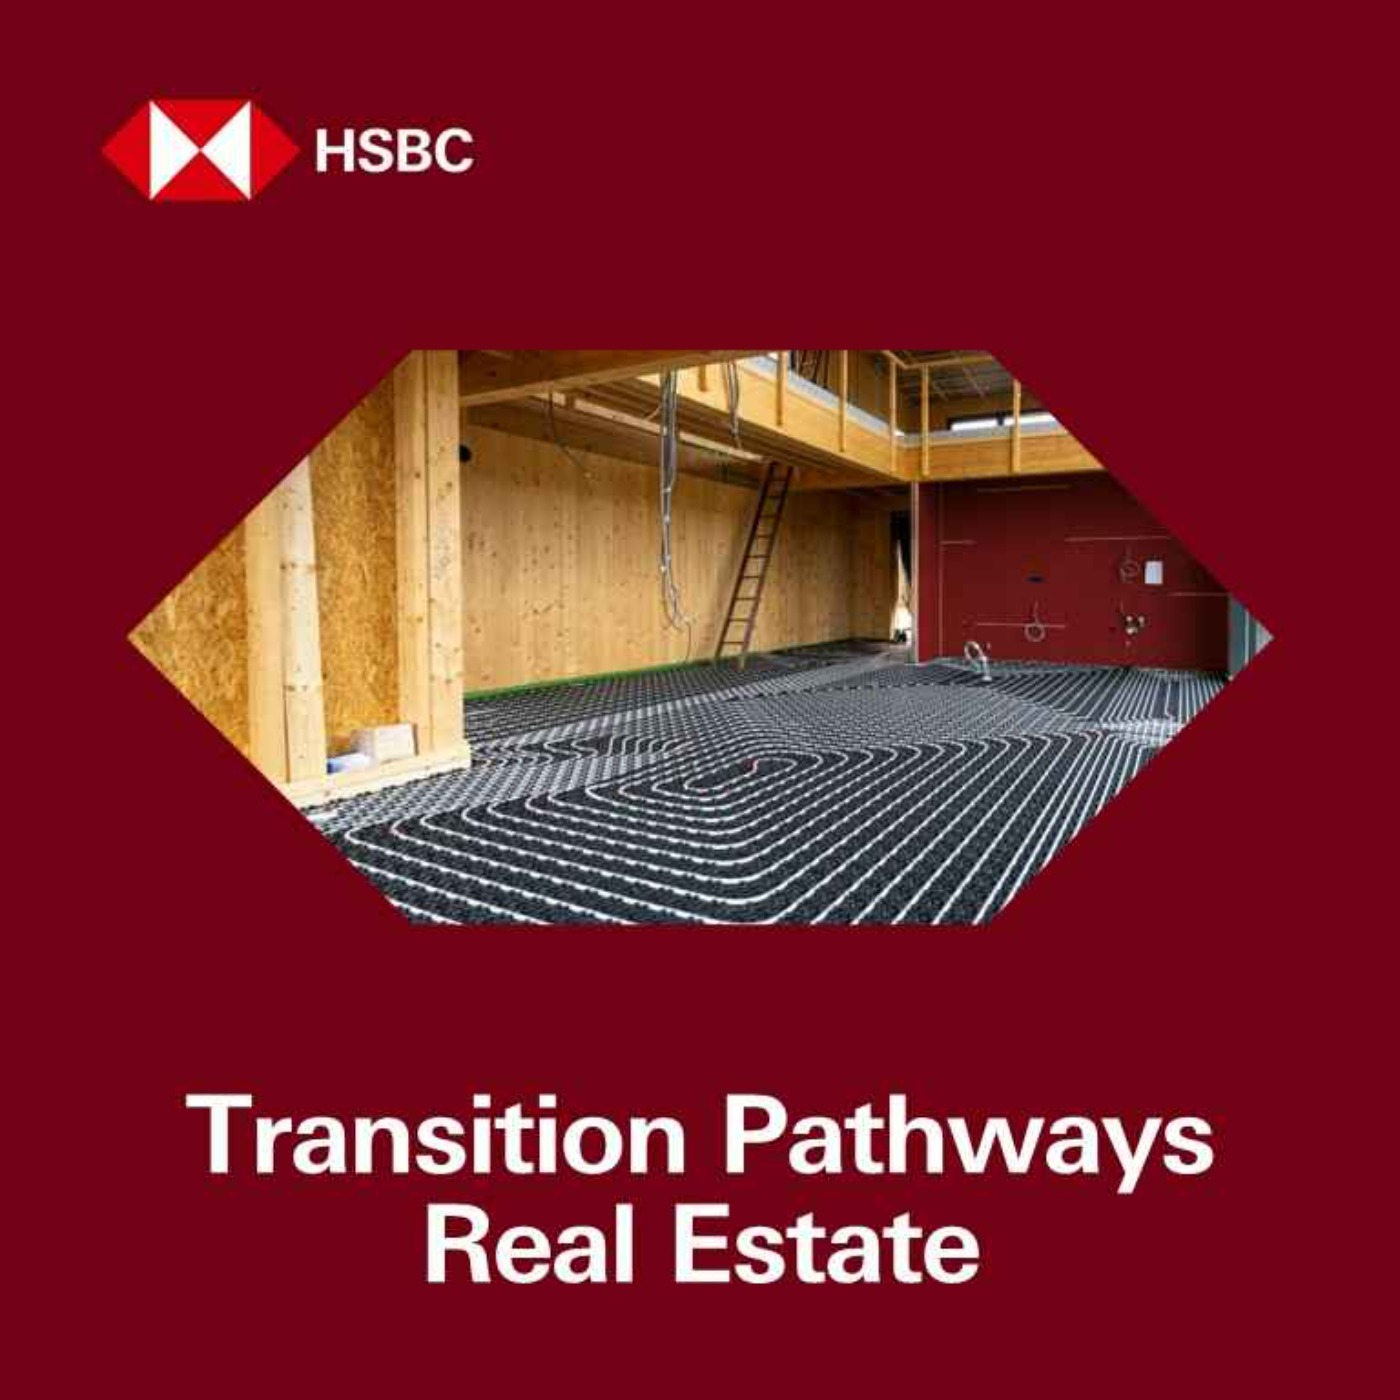 HSBC Transition Pathways: Opportunities and challenges of retrofitting in Real Estate